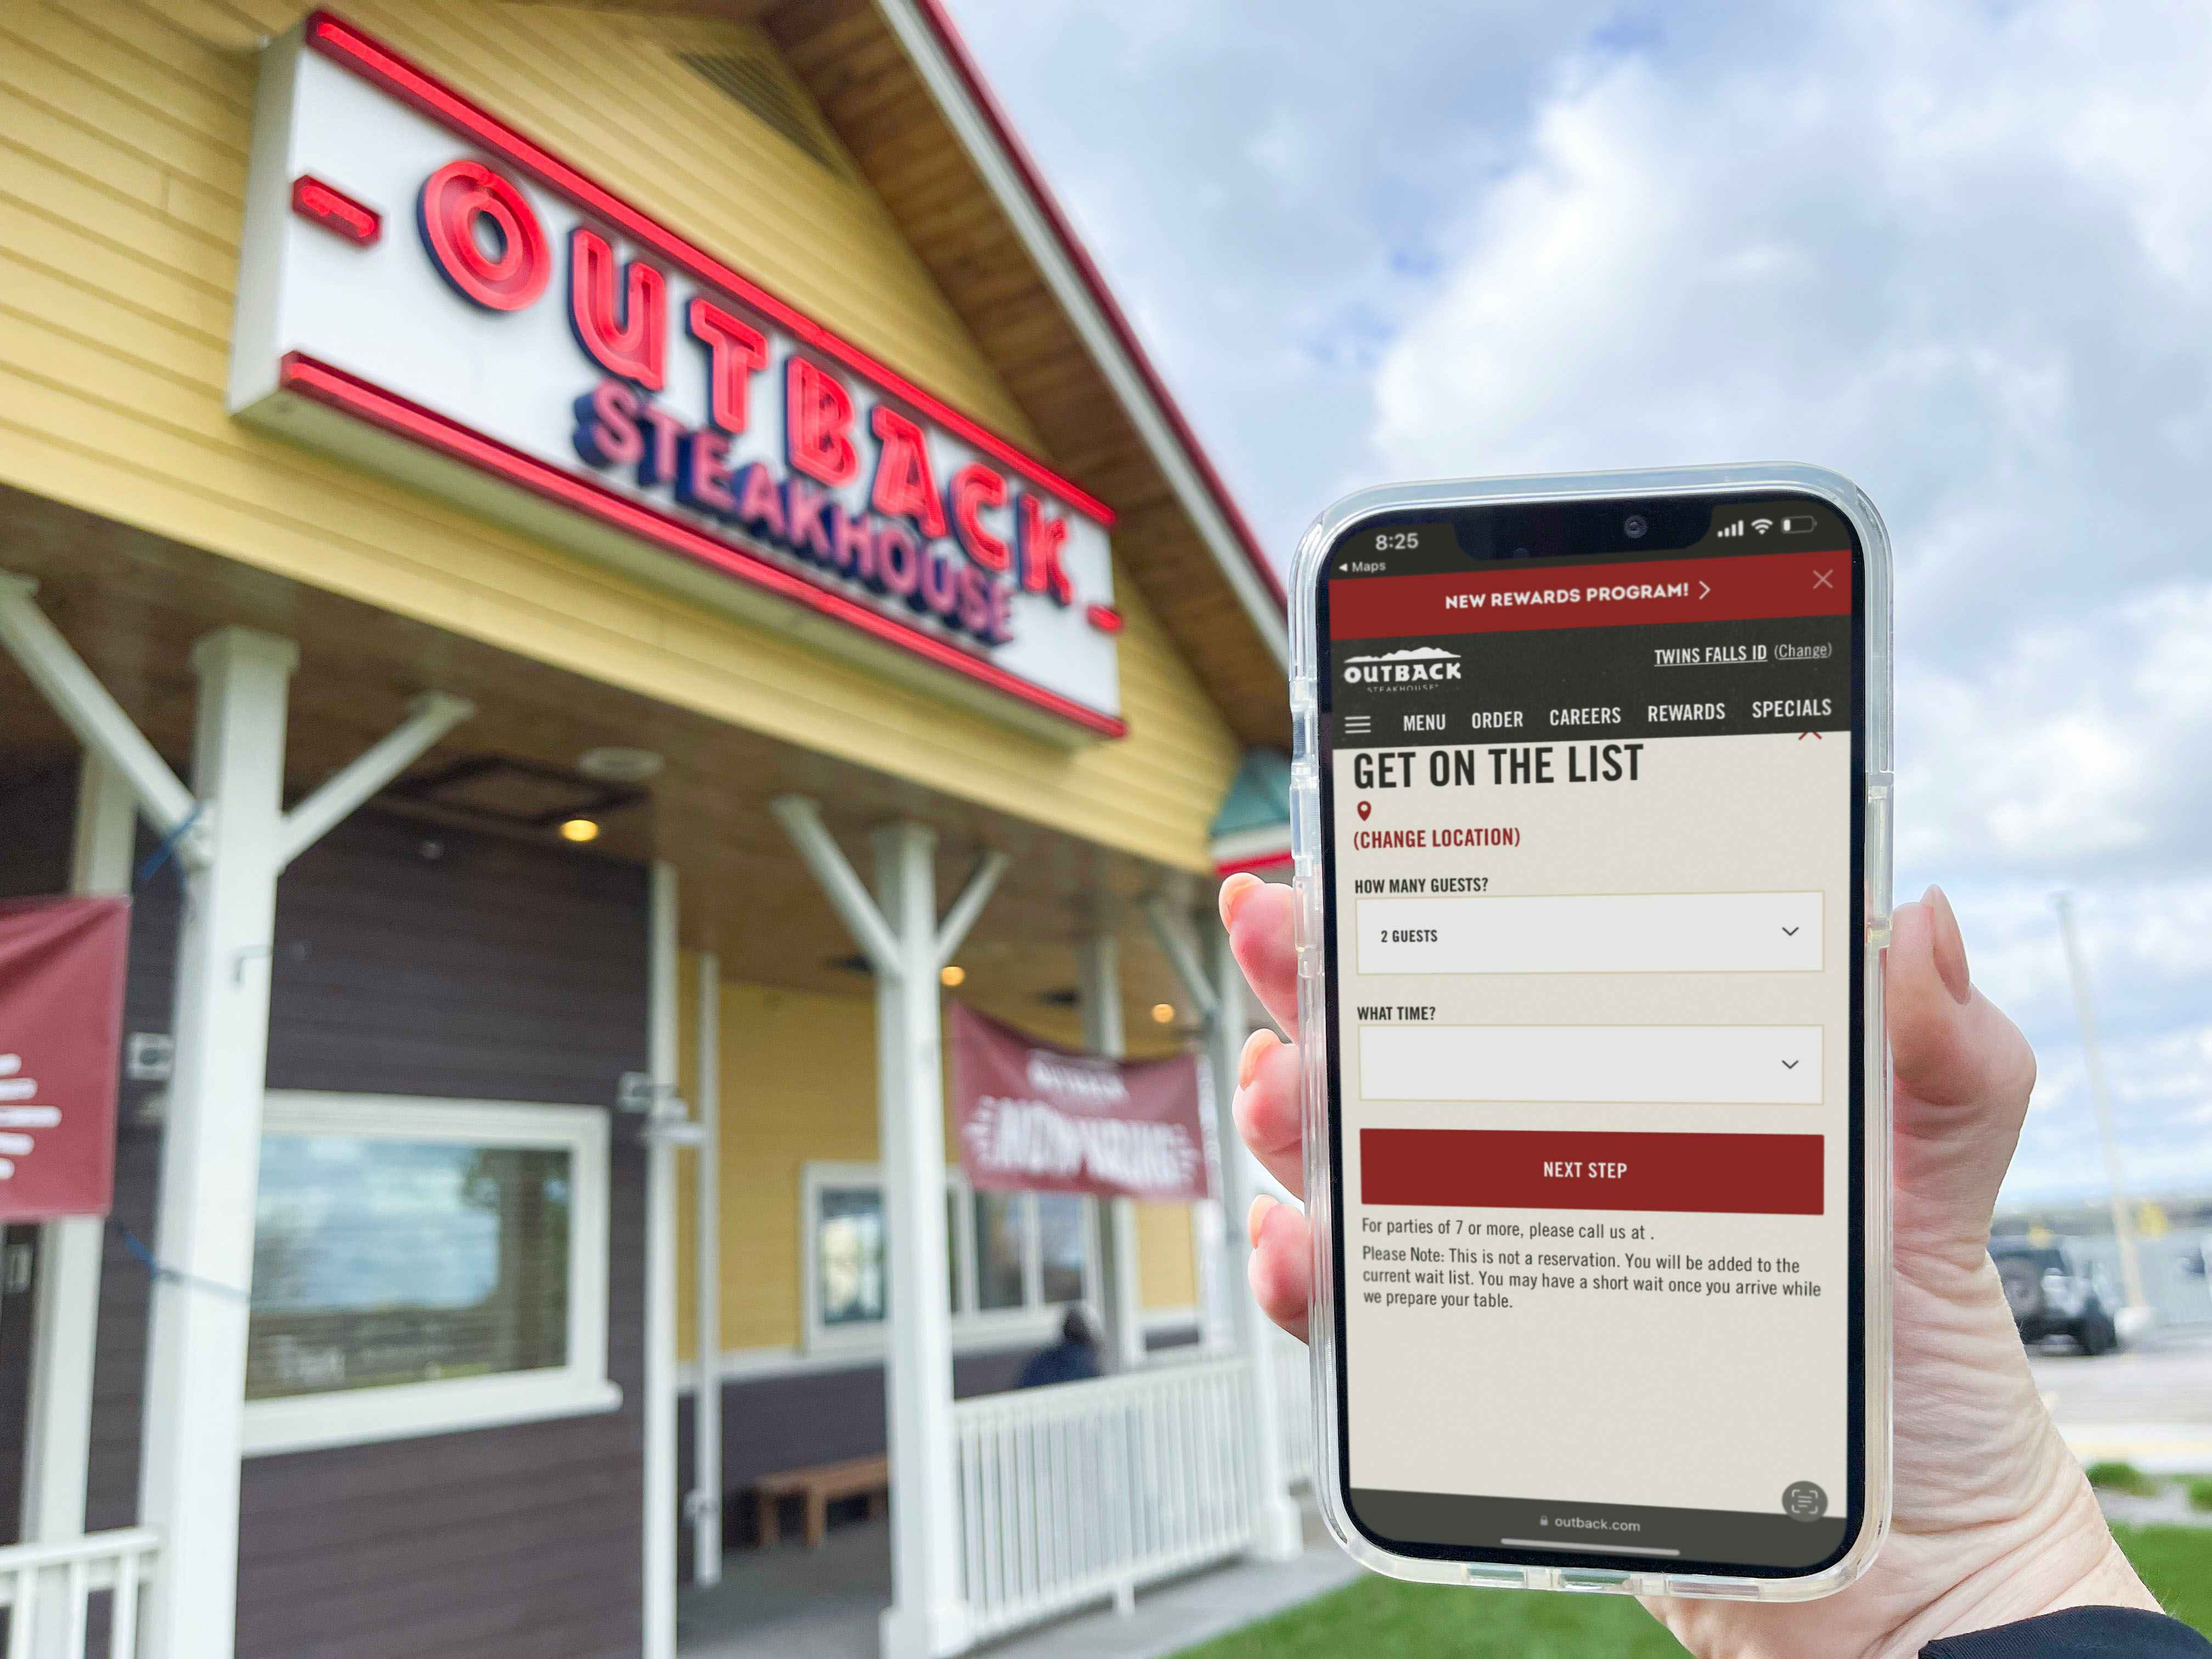 A person's hand holding up a cell phone displaying the Outback Steakhouse online waitlist form in front of an Outback Steakhouse restaurant.